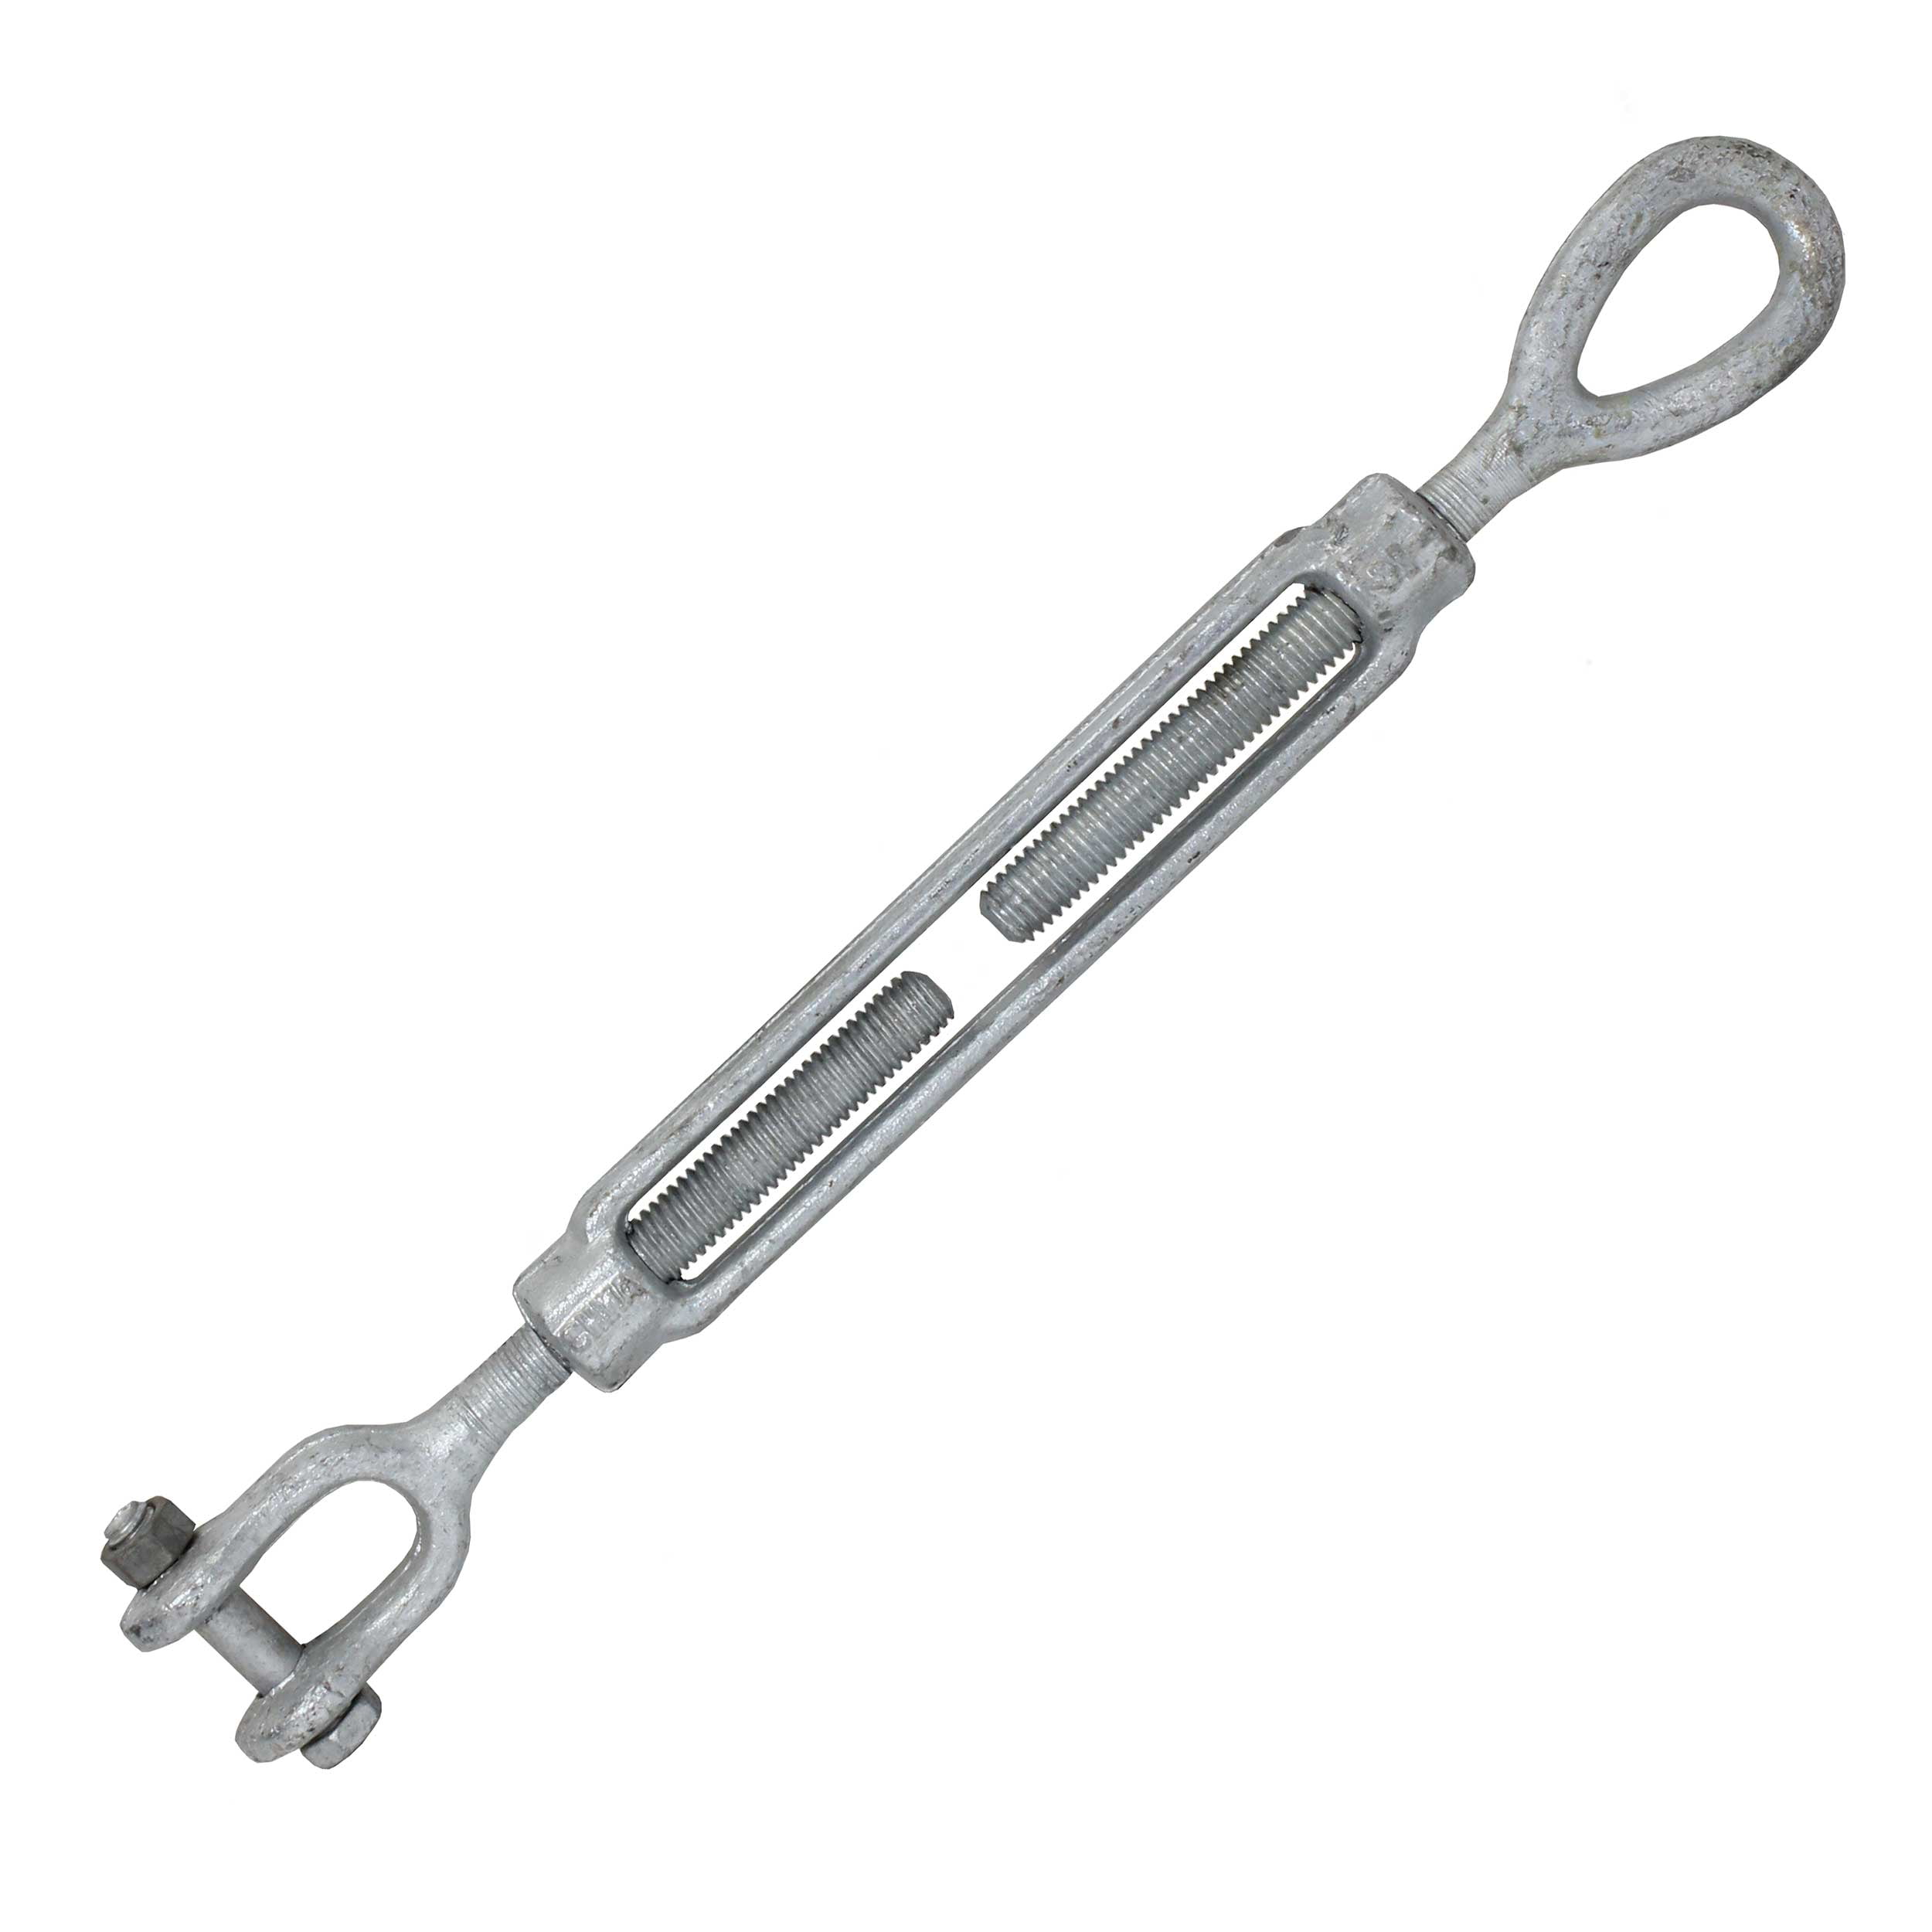 2 ea 1/2" x 12" Eye/Jaw Turnbuckles for Wire Rope cable 